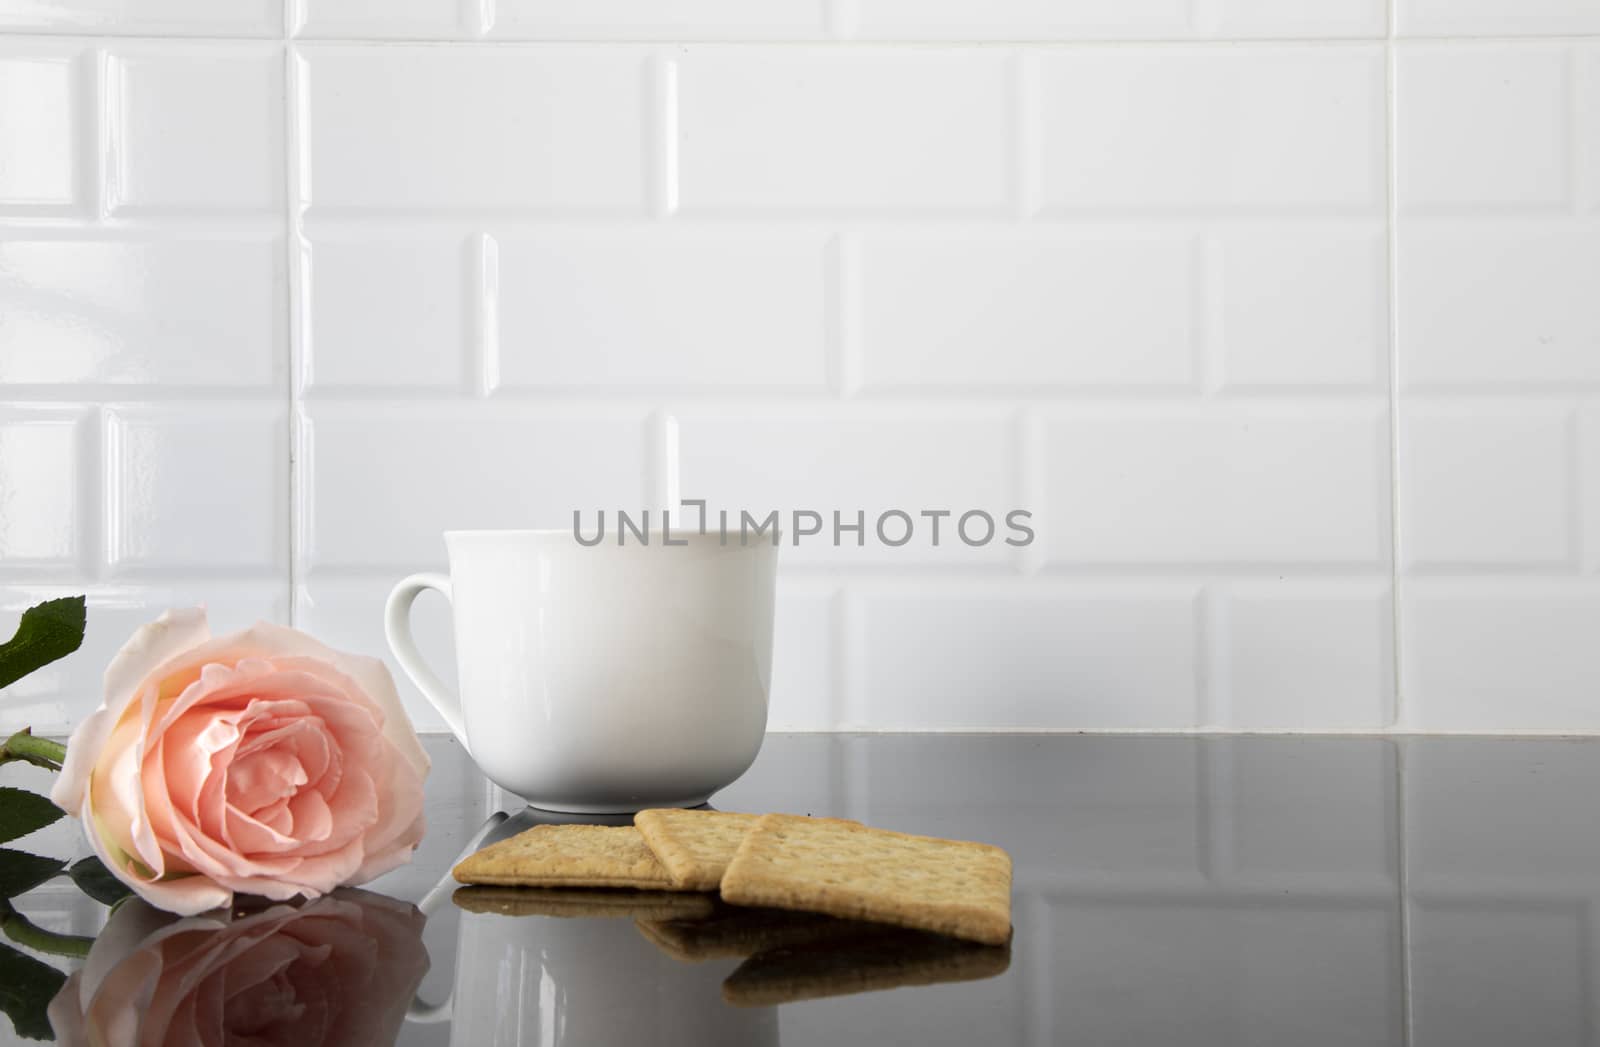 A beautiful peach color rose, pieces of biscute and a white ceramic cup of coffee on a black granite kitchen counter.